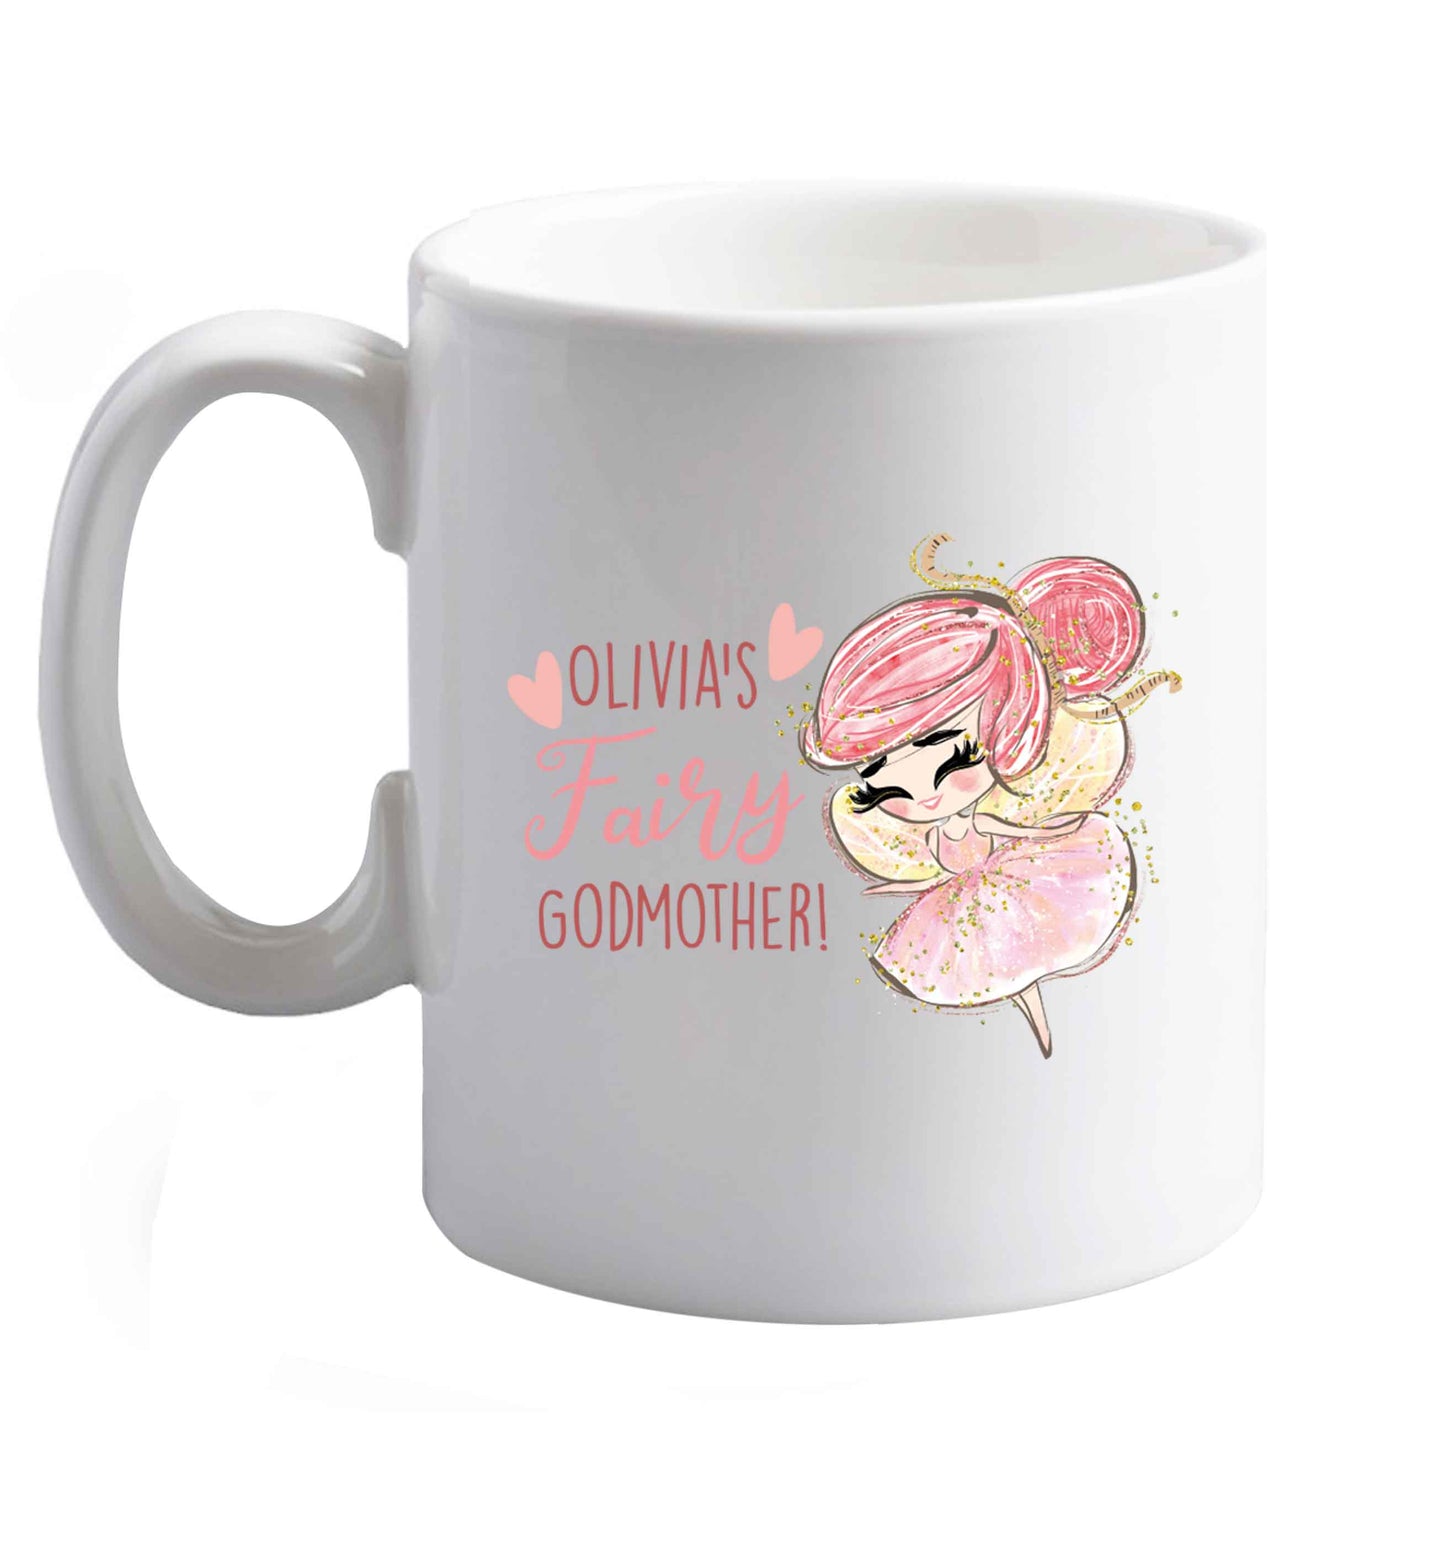 10 oz Personalised fairy Godmother - red hair  ceramic mug right handed